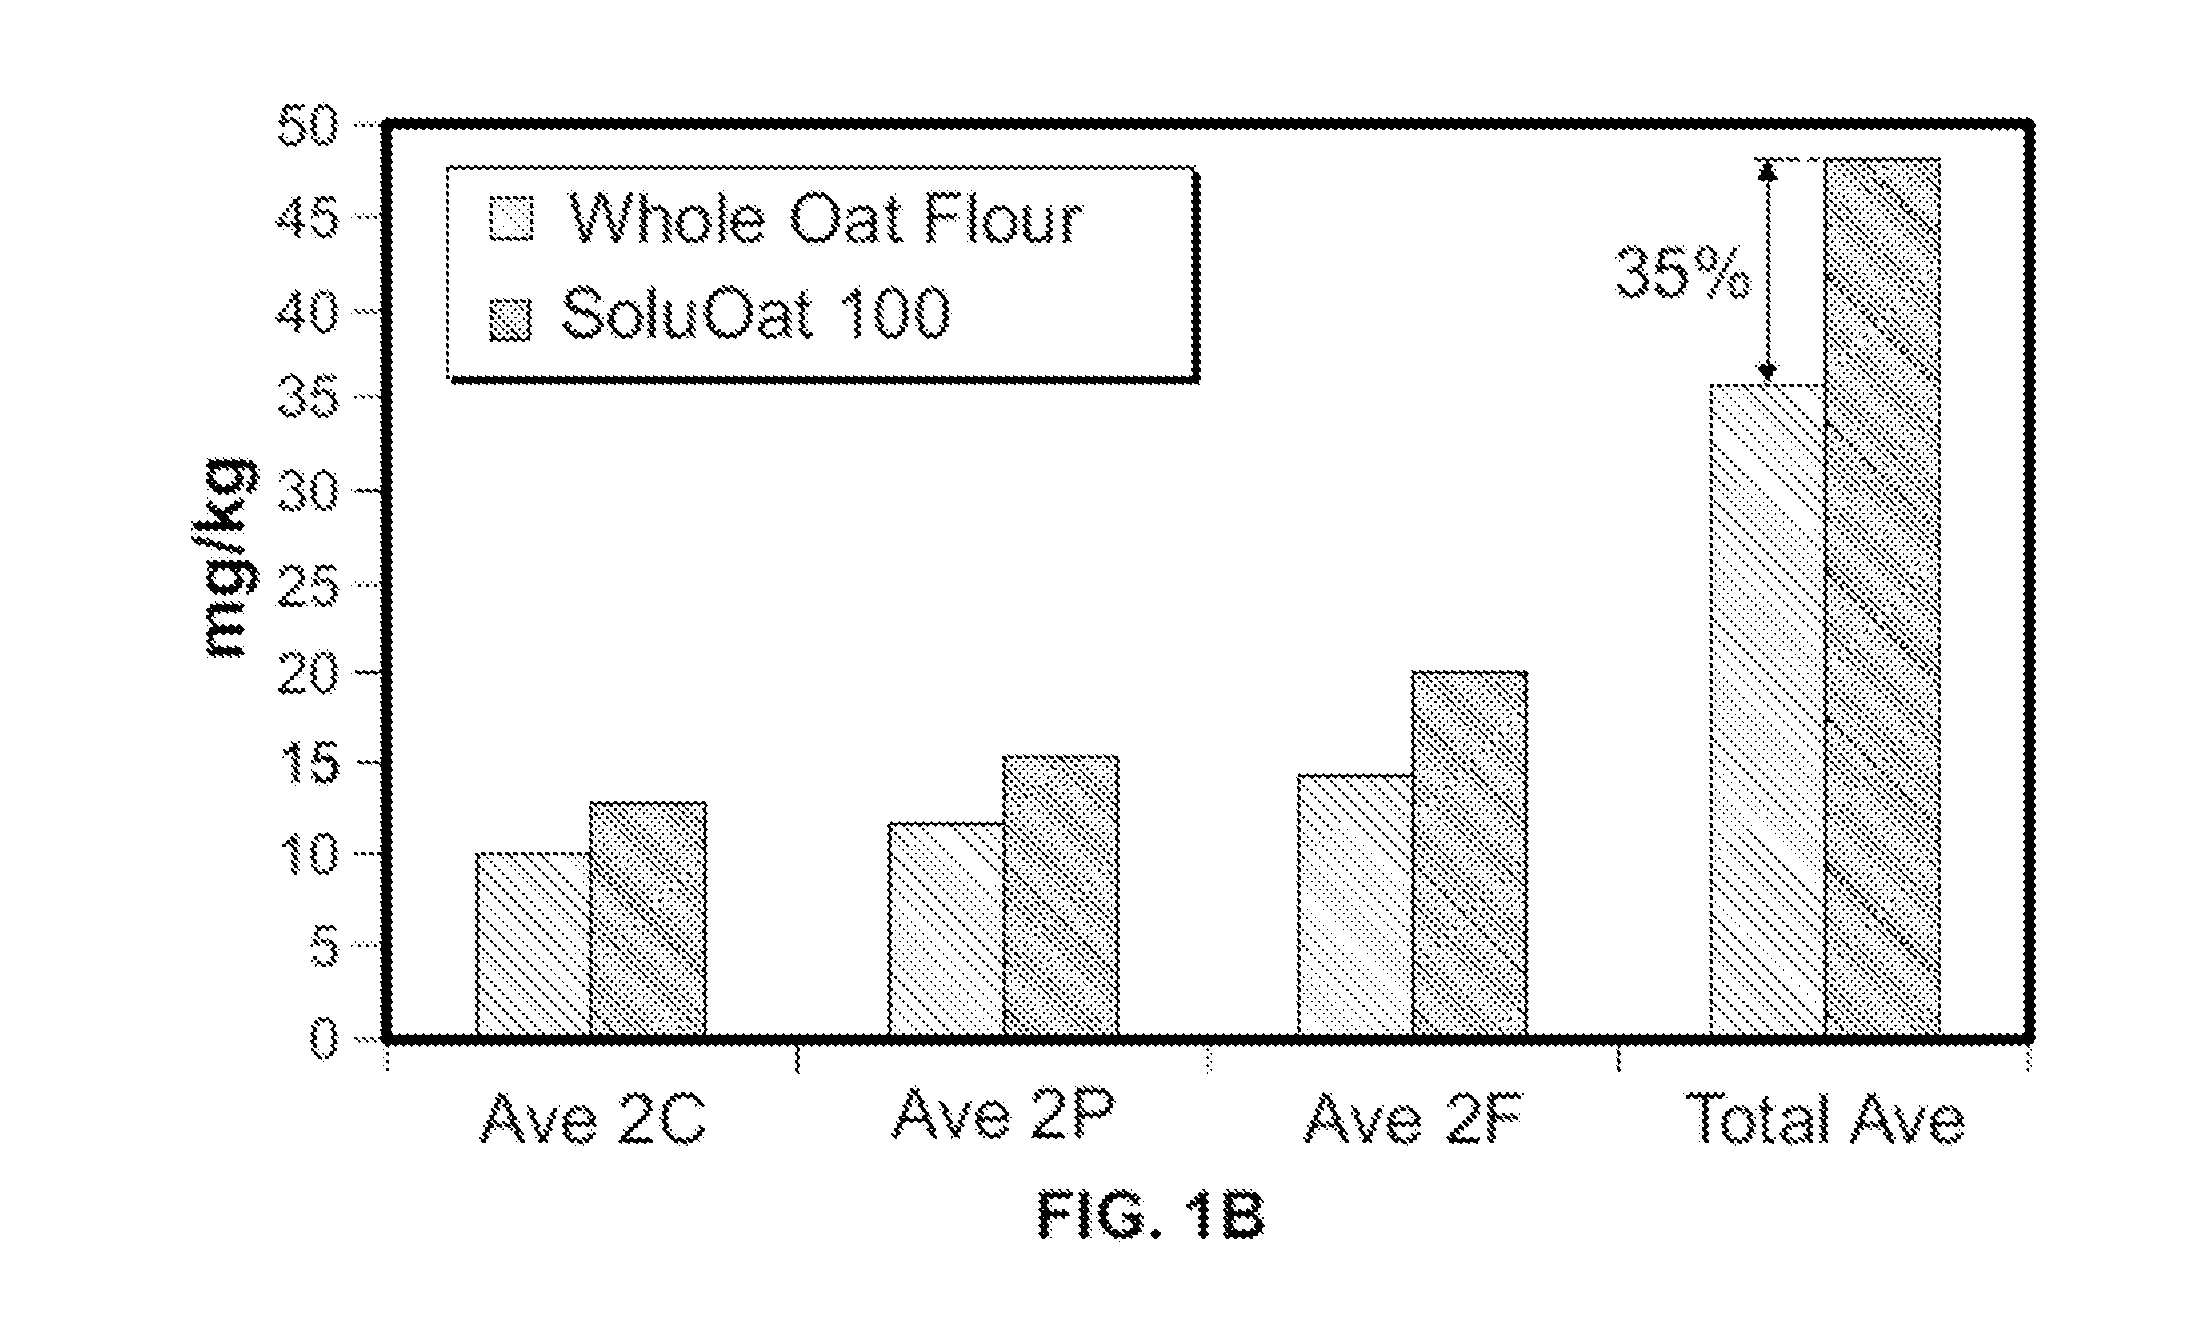 Method of Processing Oats to Achieve Oats with an Increased Avenanthramide Content